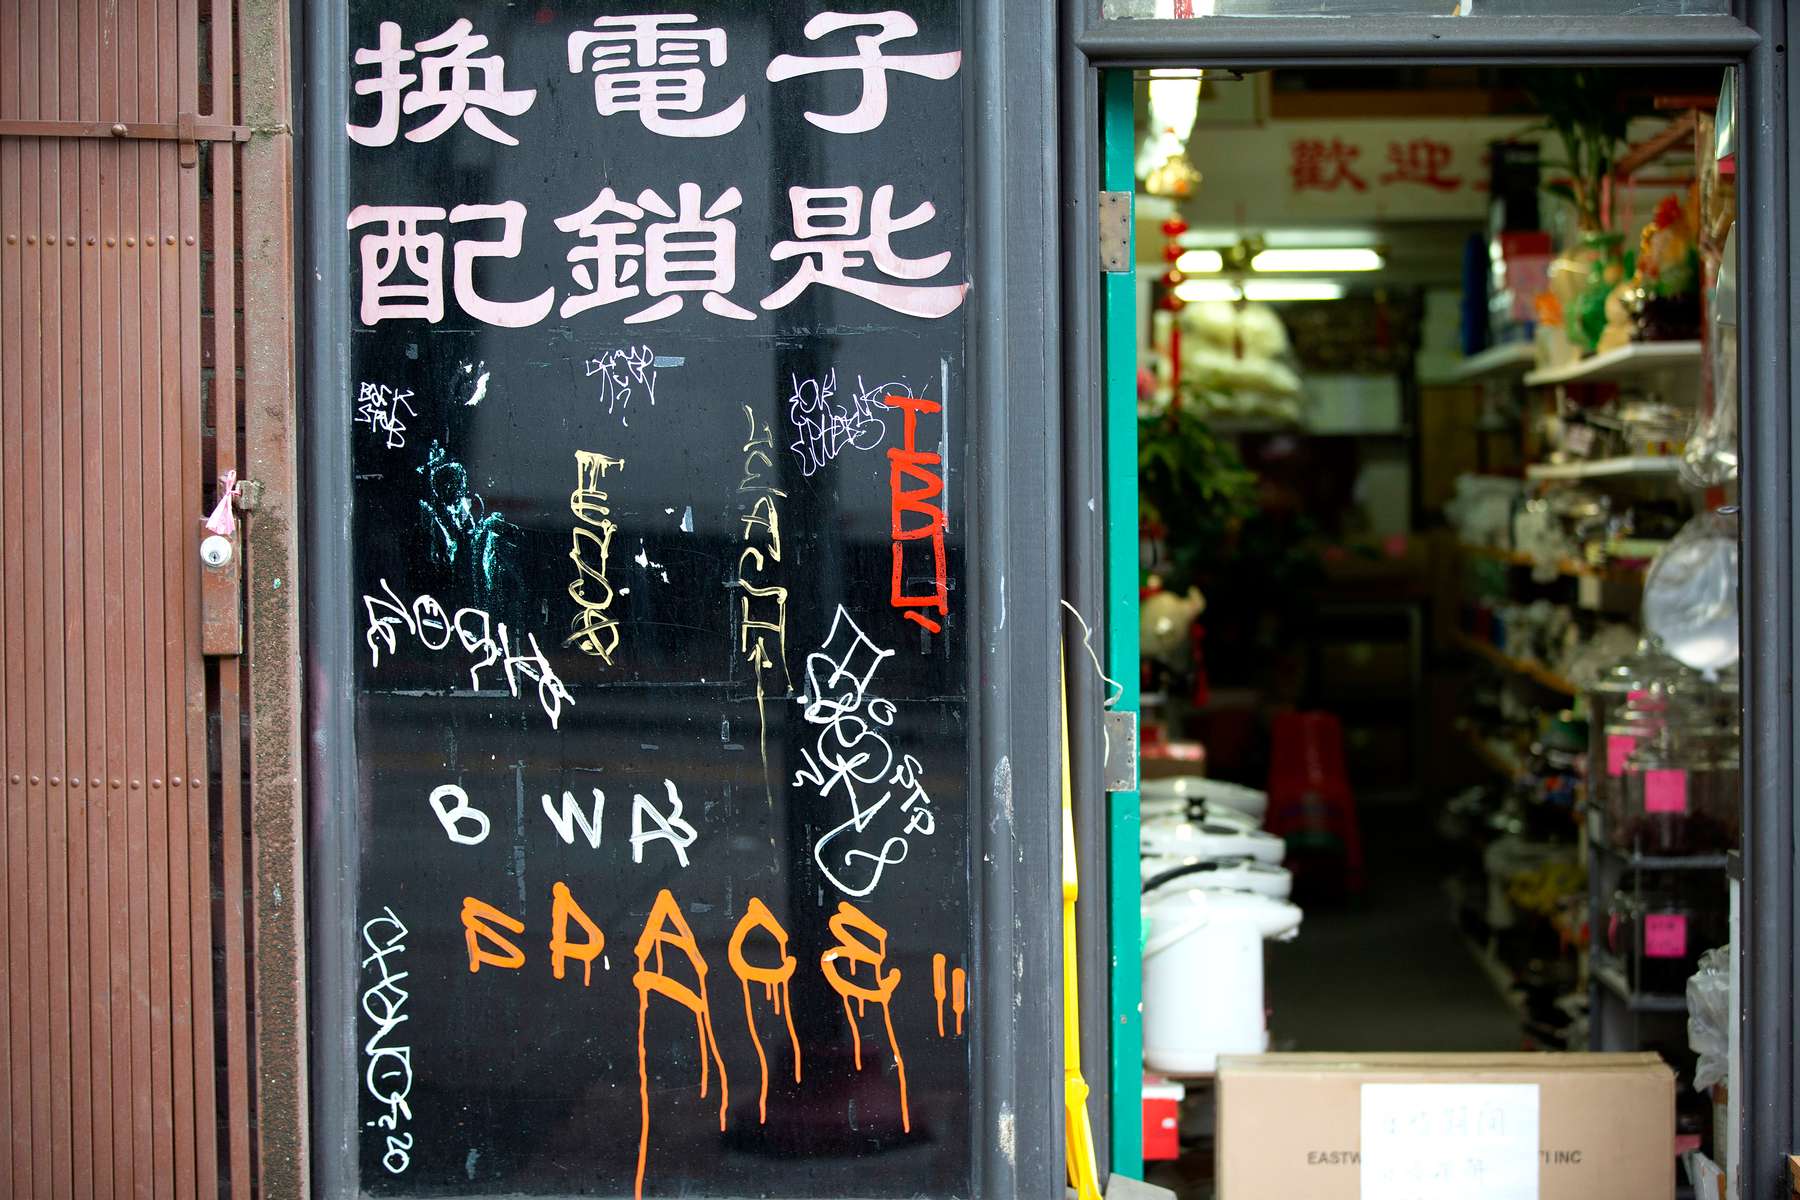 A storefront is damaged in the Chinatown-International District after a night of protests in Seattle, Wash. on May 30, 2020. Protests around the country became violent over the past couple days after the police killing of George Floyd, a black man in Minneapolis, who was killed while in the custody of white police officers. Residents of the Chinatown-International District were already on edge after a couple Asian-targeted hate crimes occurred in the neighborhood fueled by President Donald Trump’s references of COVID-19 as the “Chinese virus” or “Kung flu.”